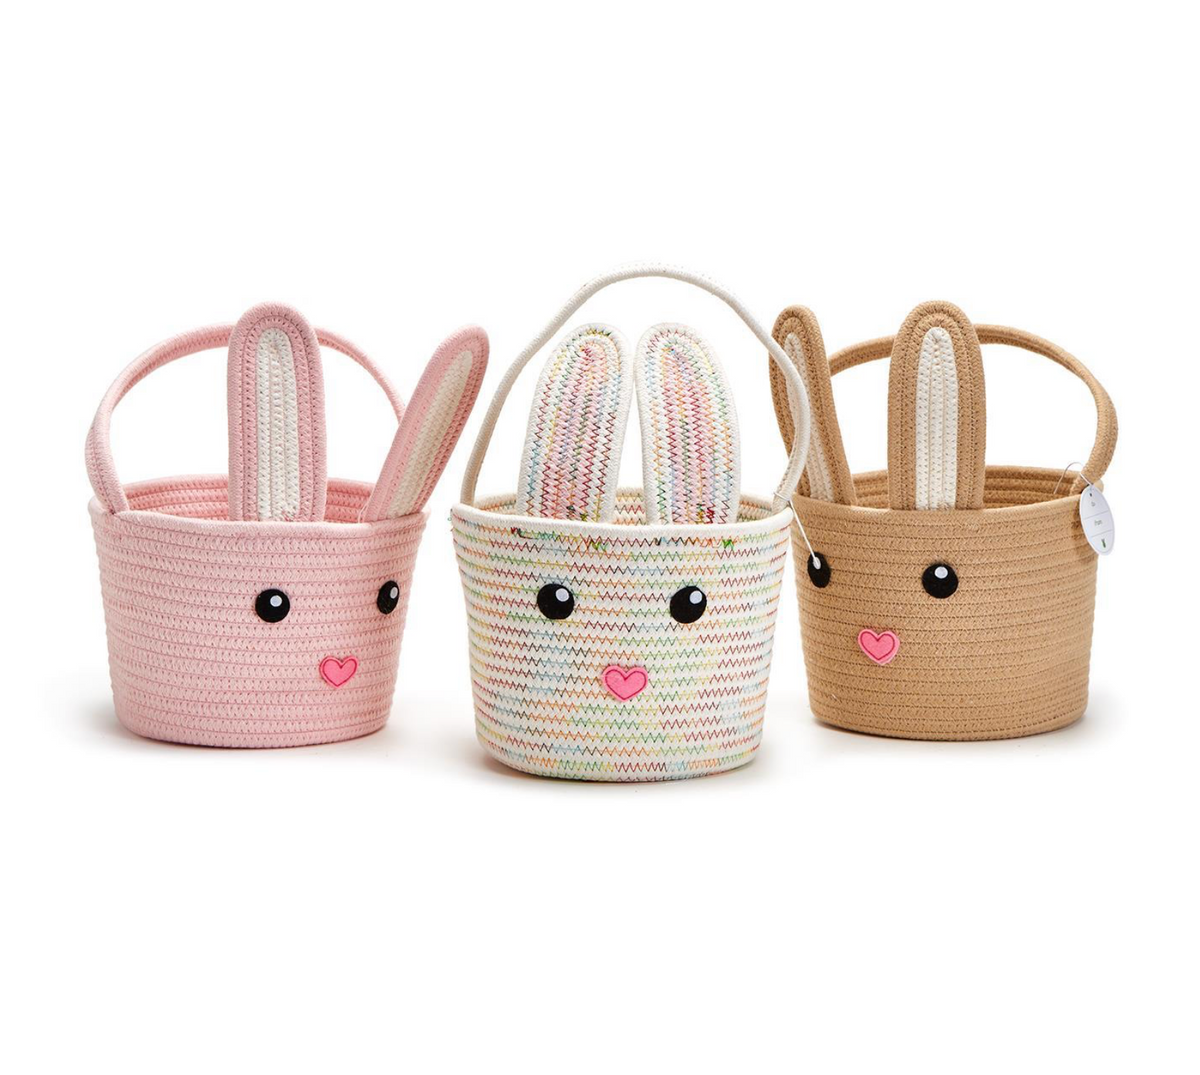 HAND-CRAFTED BUNNY BASKET WITH HANDLE